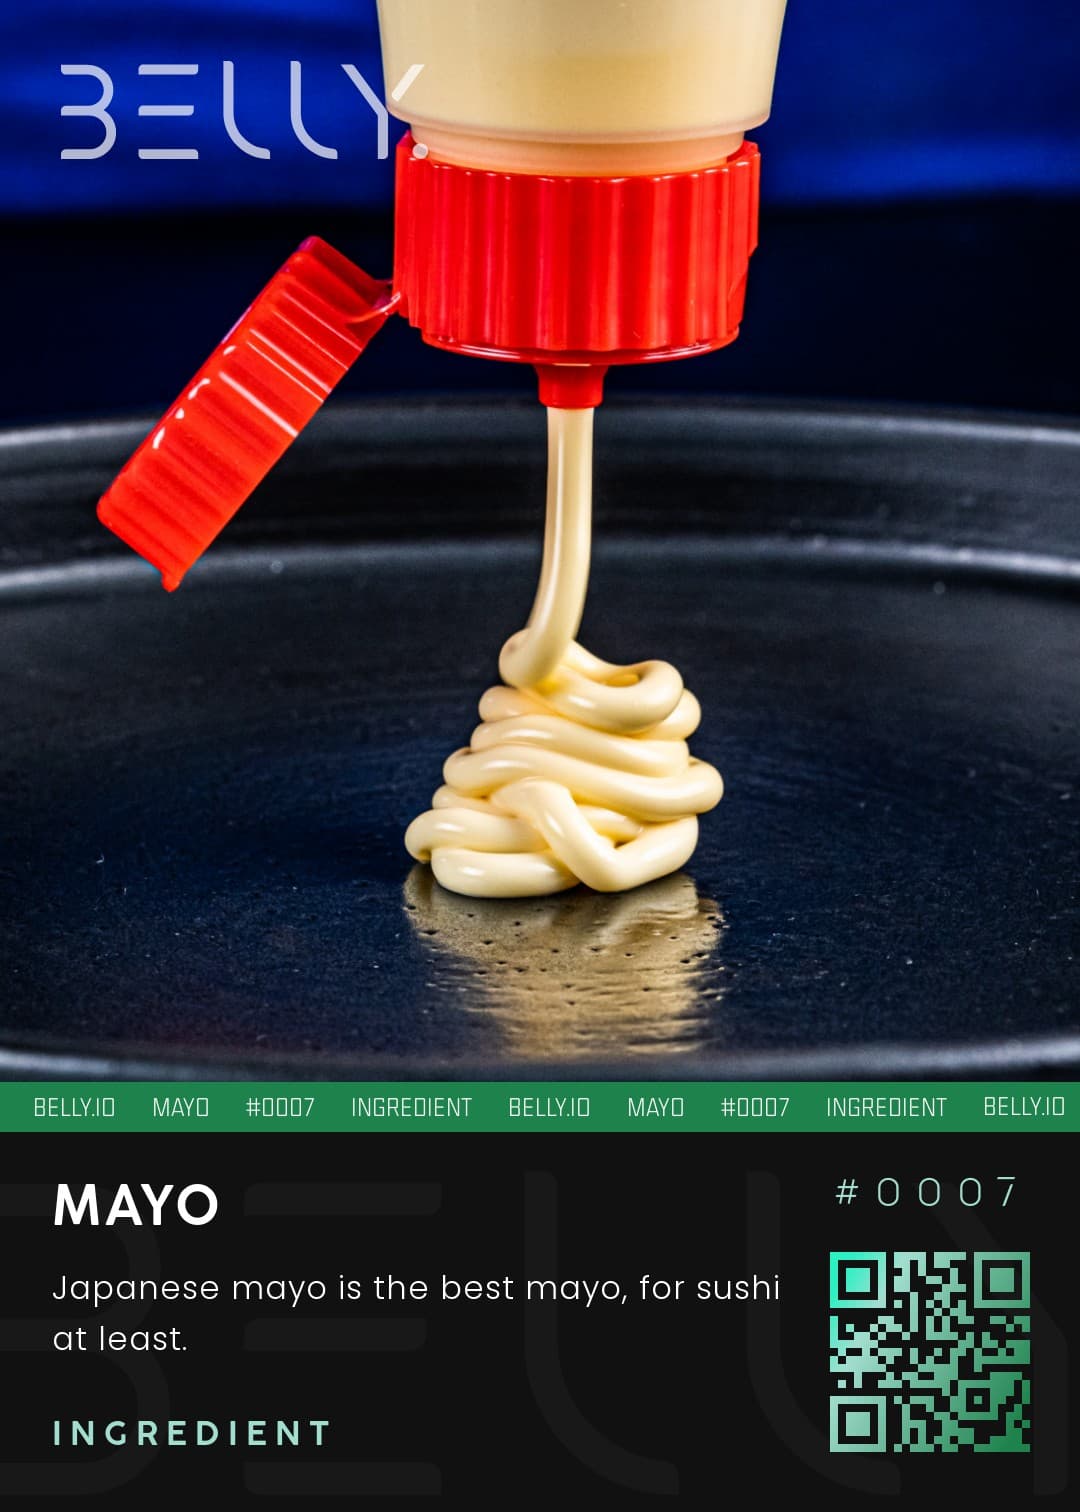 Mayo - Japanese mayo is the best mayo, for sushi at least.